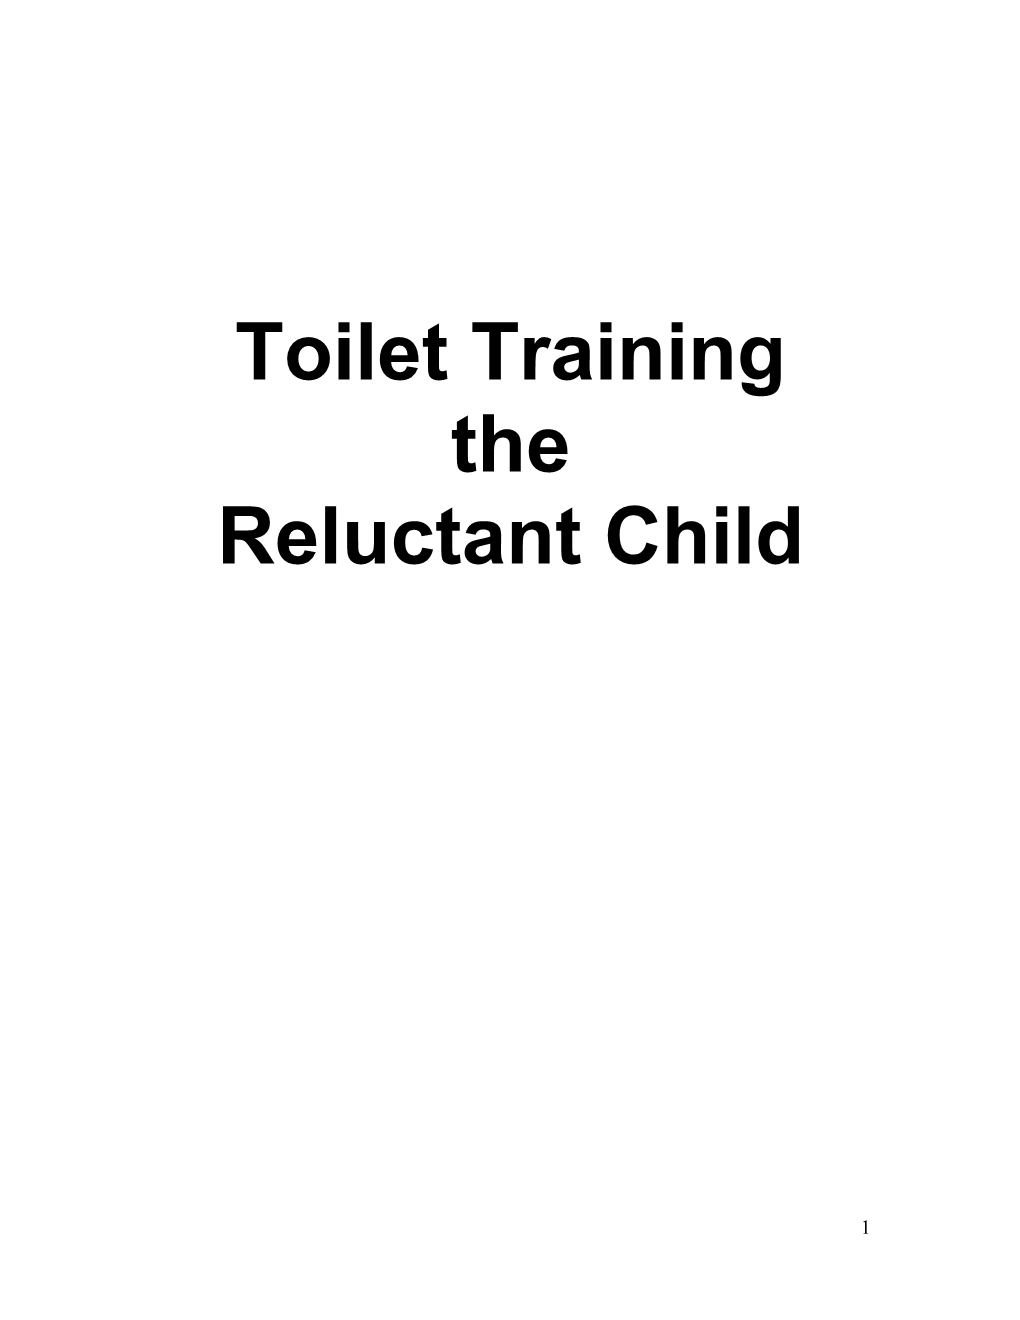 Toilet Training the Reluctant Child